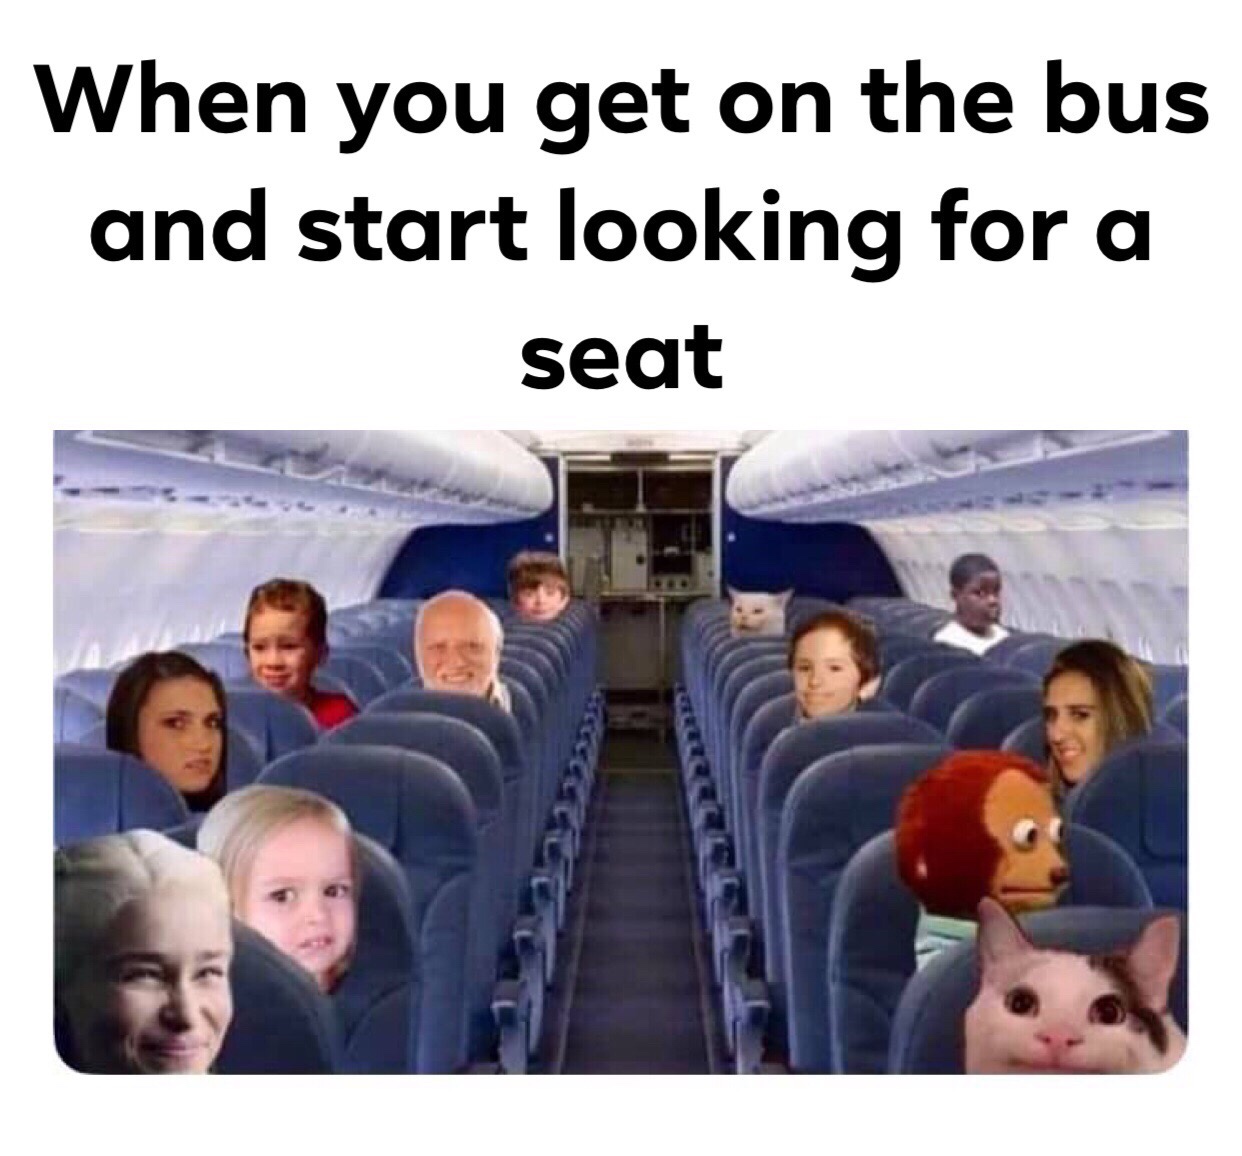 airplane - When you get on the bus and start looking for a seat